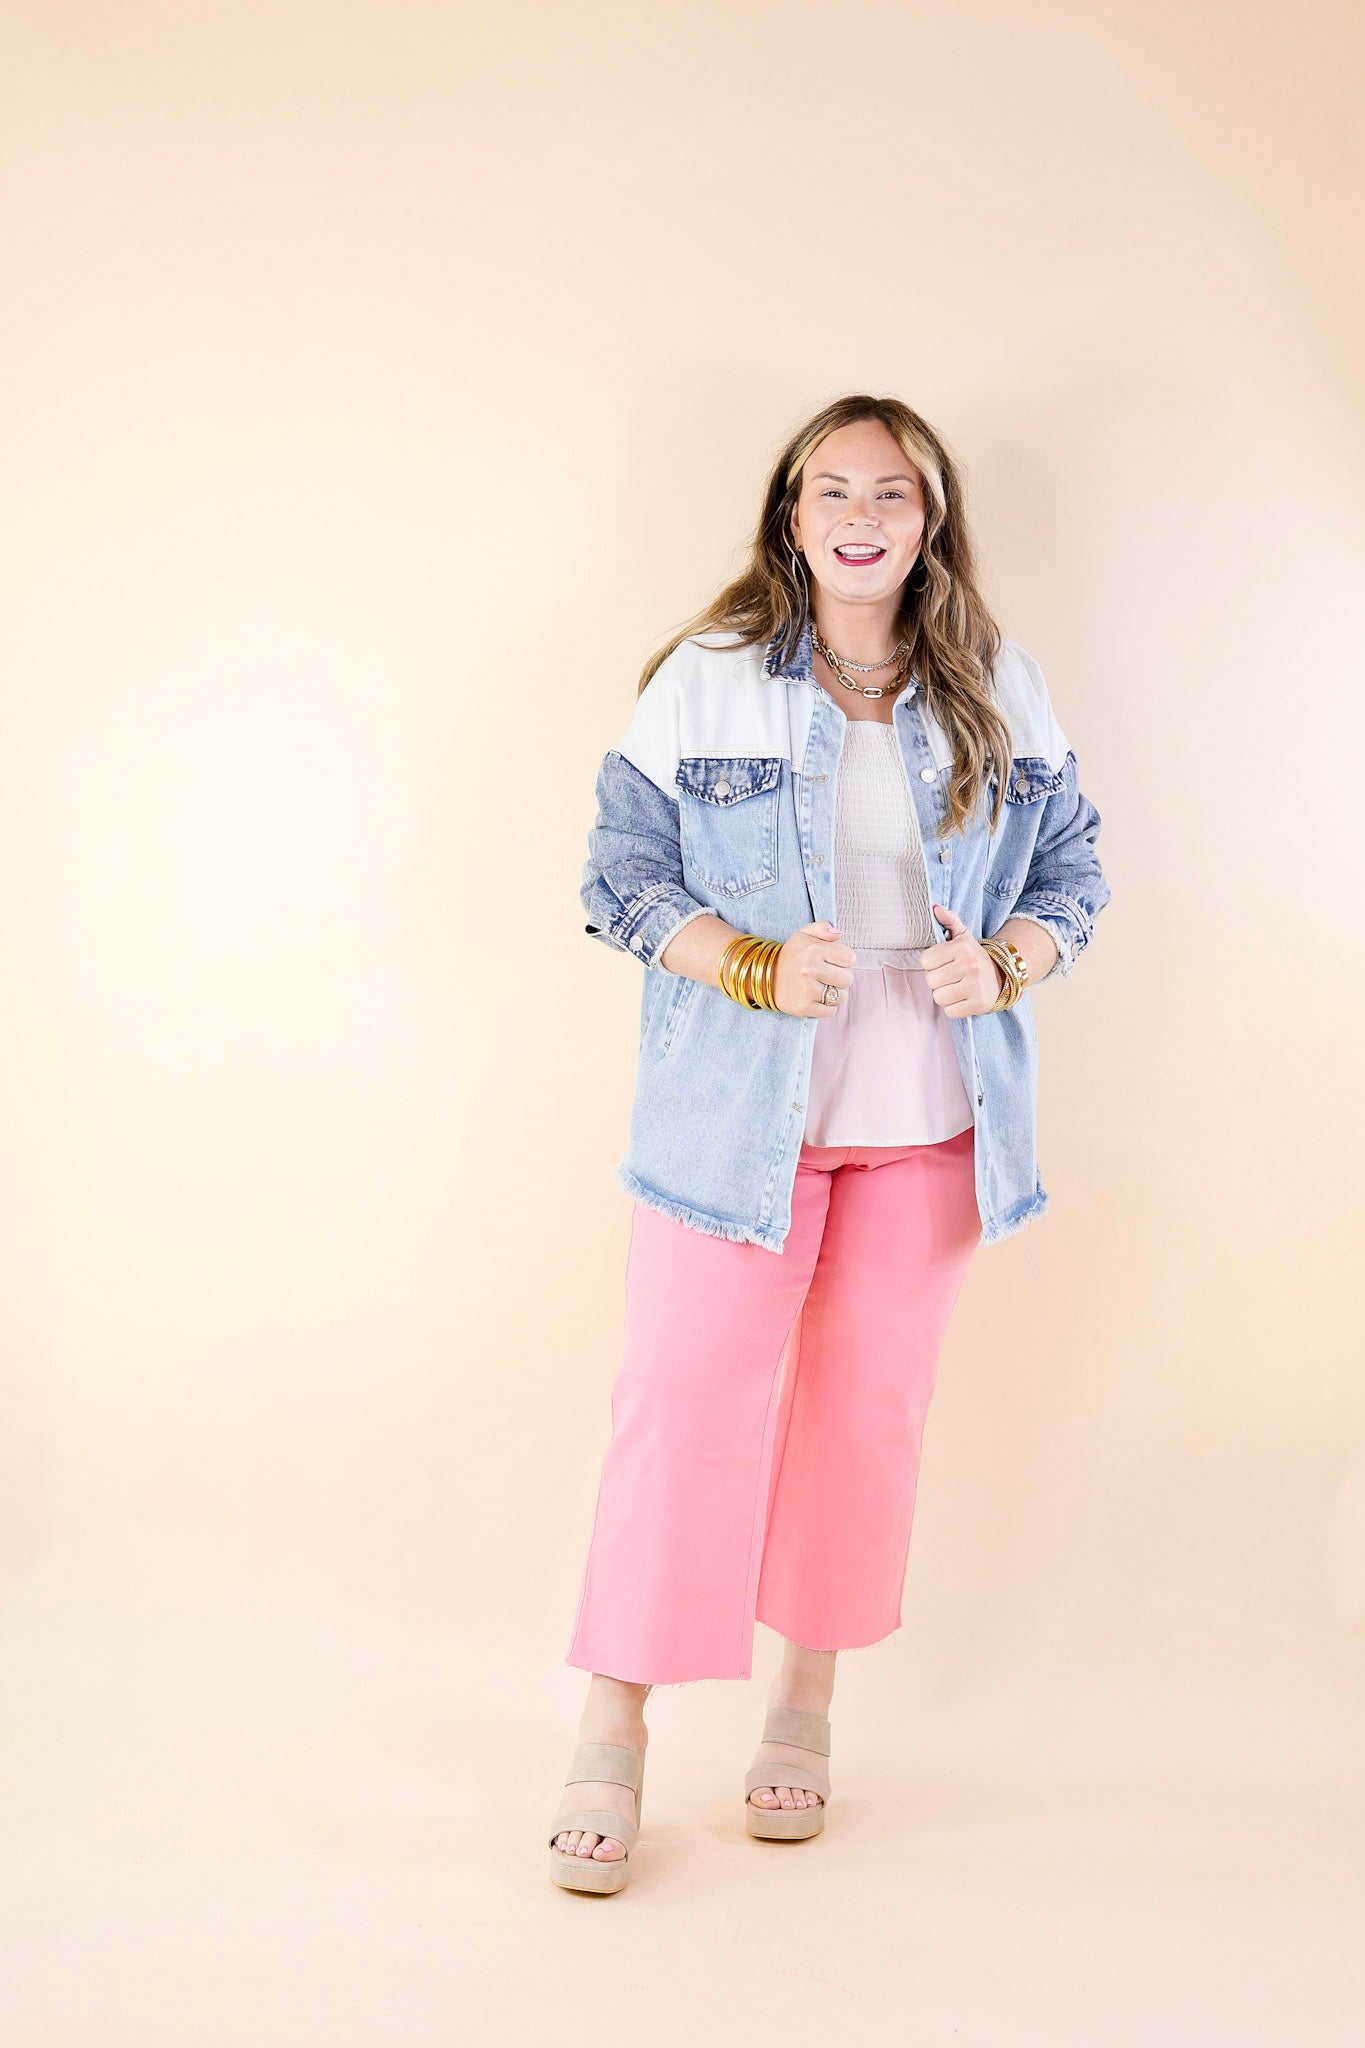 Style Mentor Color Block Button Up Jacket in Denim - Giddy Up Glamour Boutique